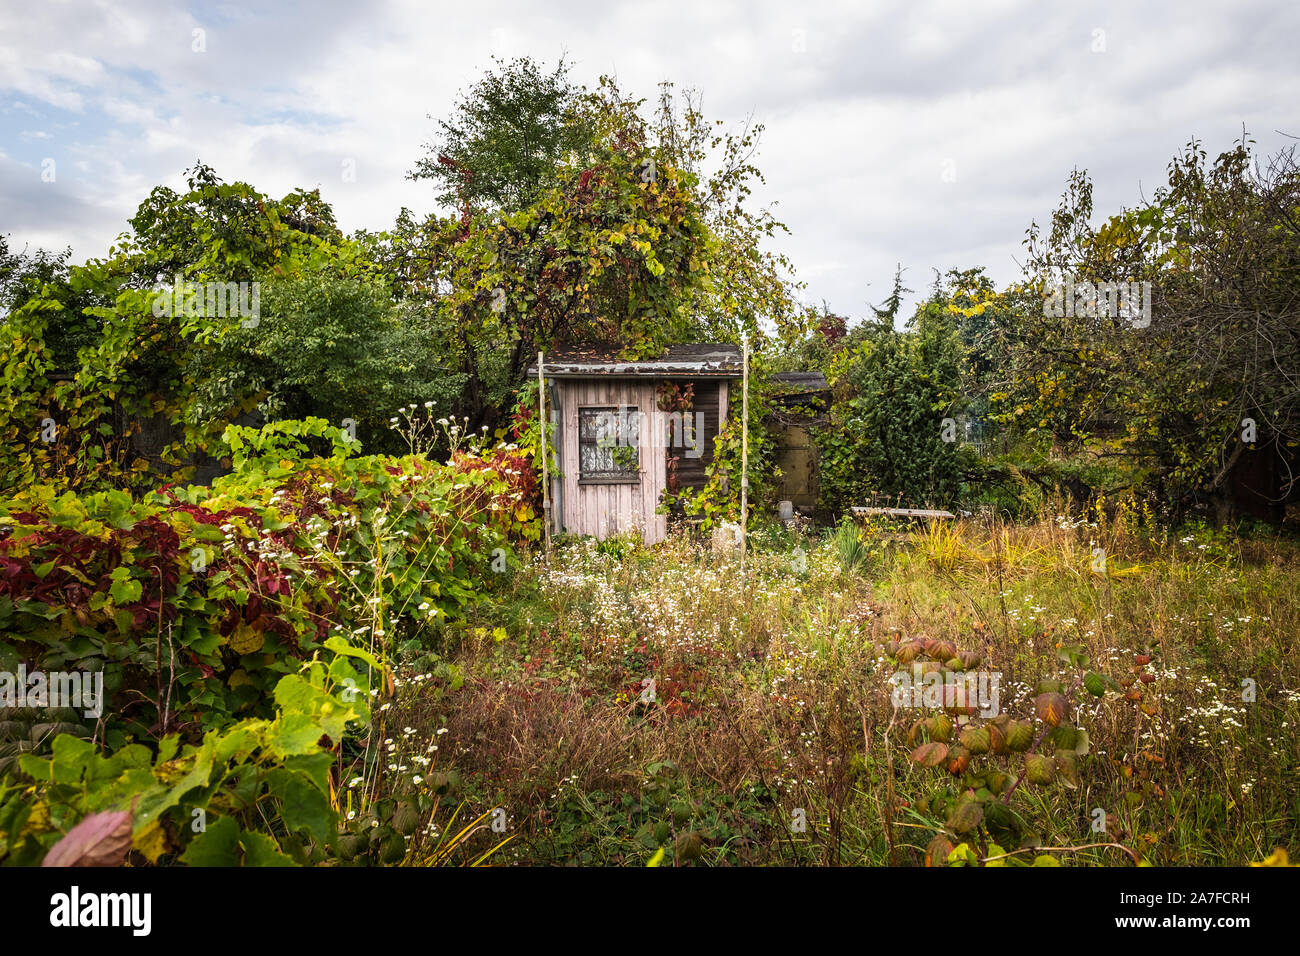 A small shed in an allotment area in Warsaw Poland. The foliage remained untouched making it a perfect habitat for bees and small mammals Stock Photo